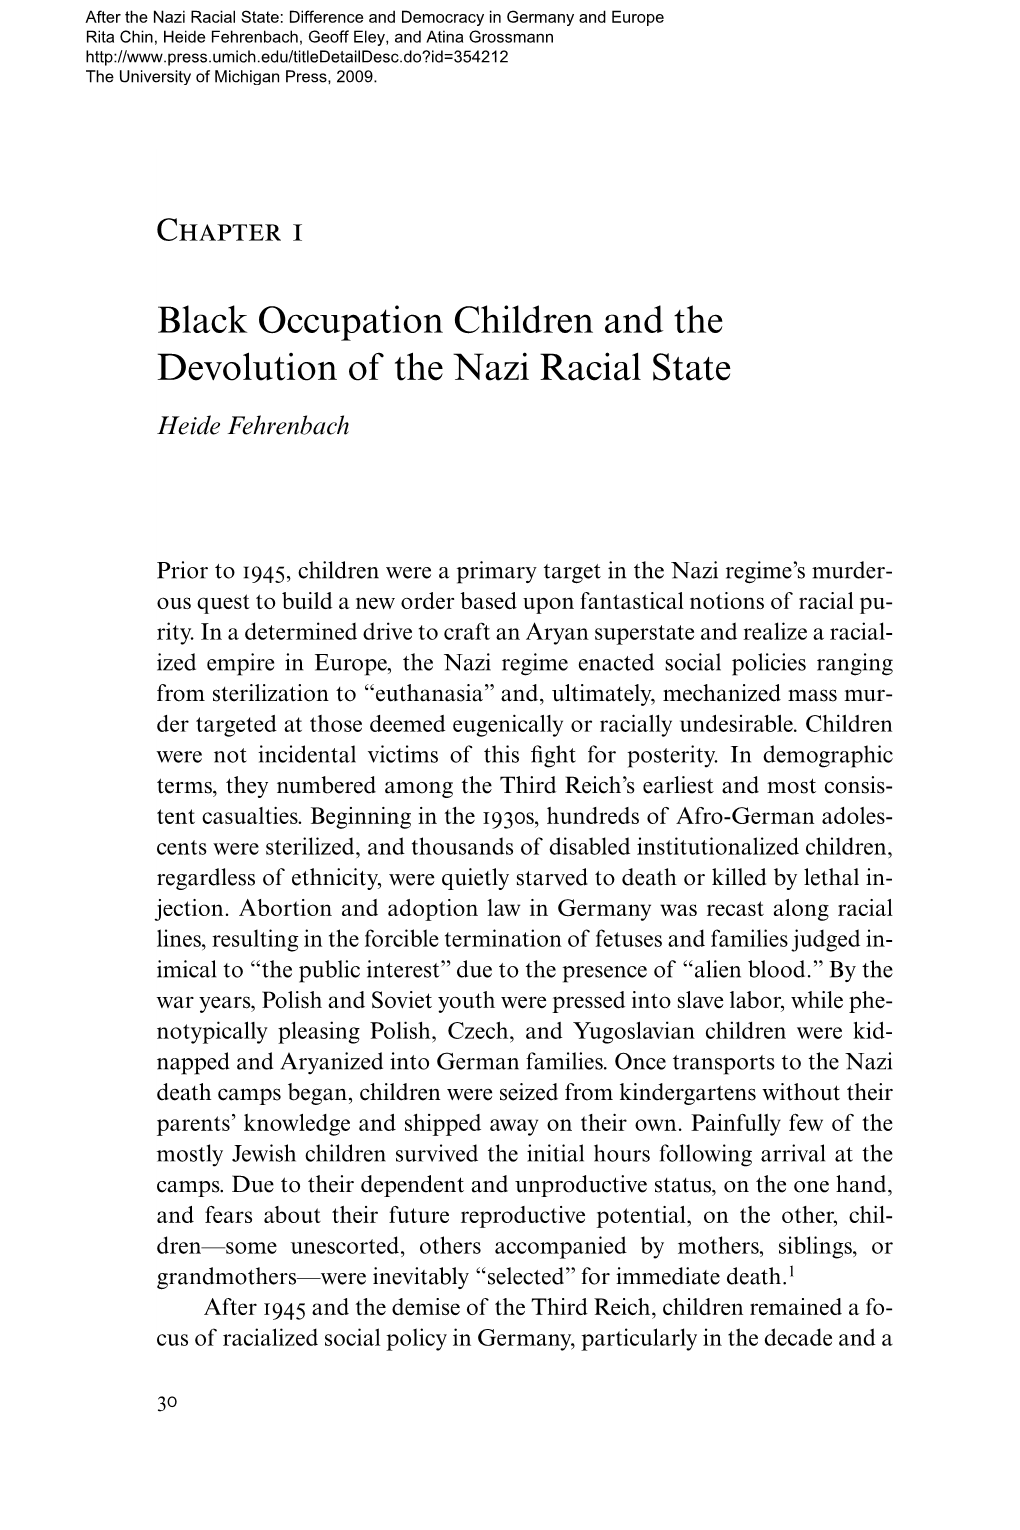 Black Occupation Children and the Devolution of the Nazi Racial State Heide Fehrenbach